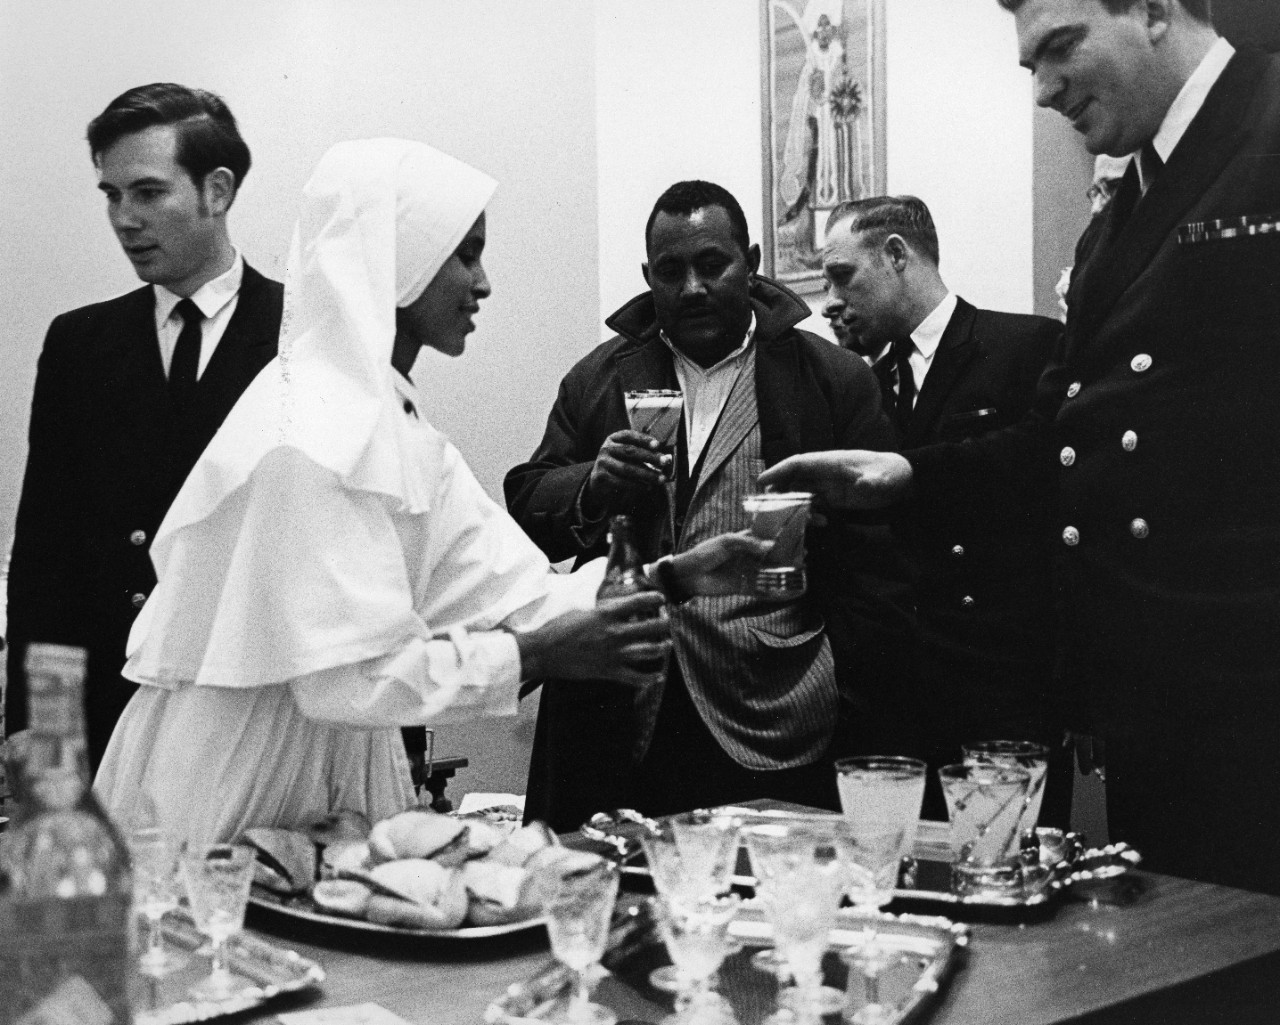 February 1972, Asmara, Ethiopia: The U.S. Sixth Fleet Band members are served refreshments at Asmara’s expo, after playing for the Ethiopian Navy Days celebration. Other bands that participated in the celebration are from France, Great Britain, Sudan, the Soviet Union, Italy, and the host country, Ethiopia.